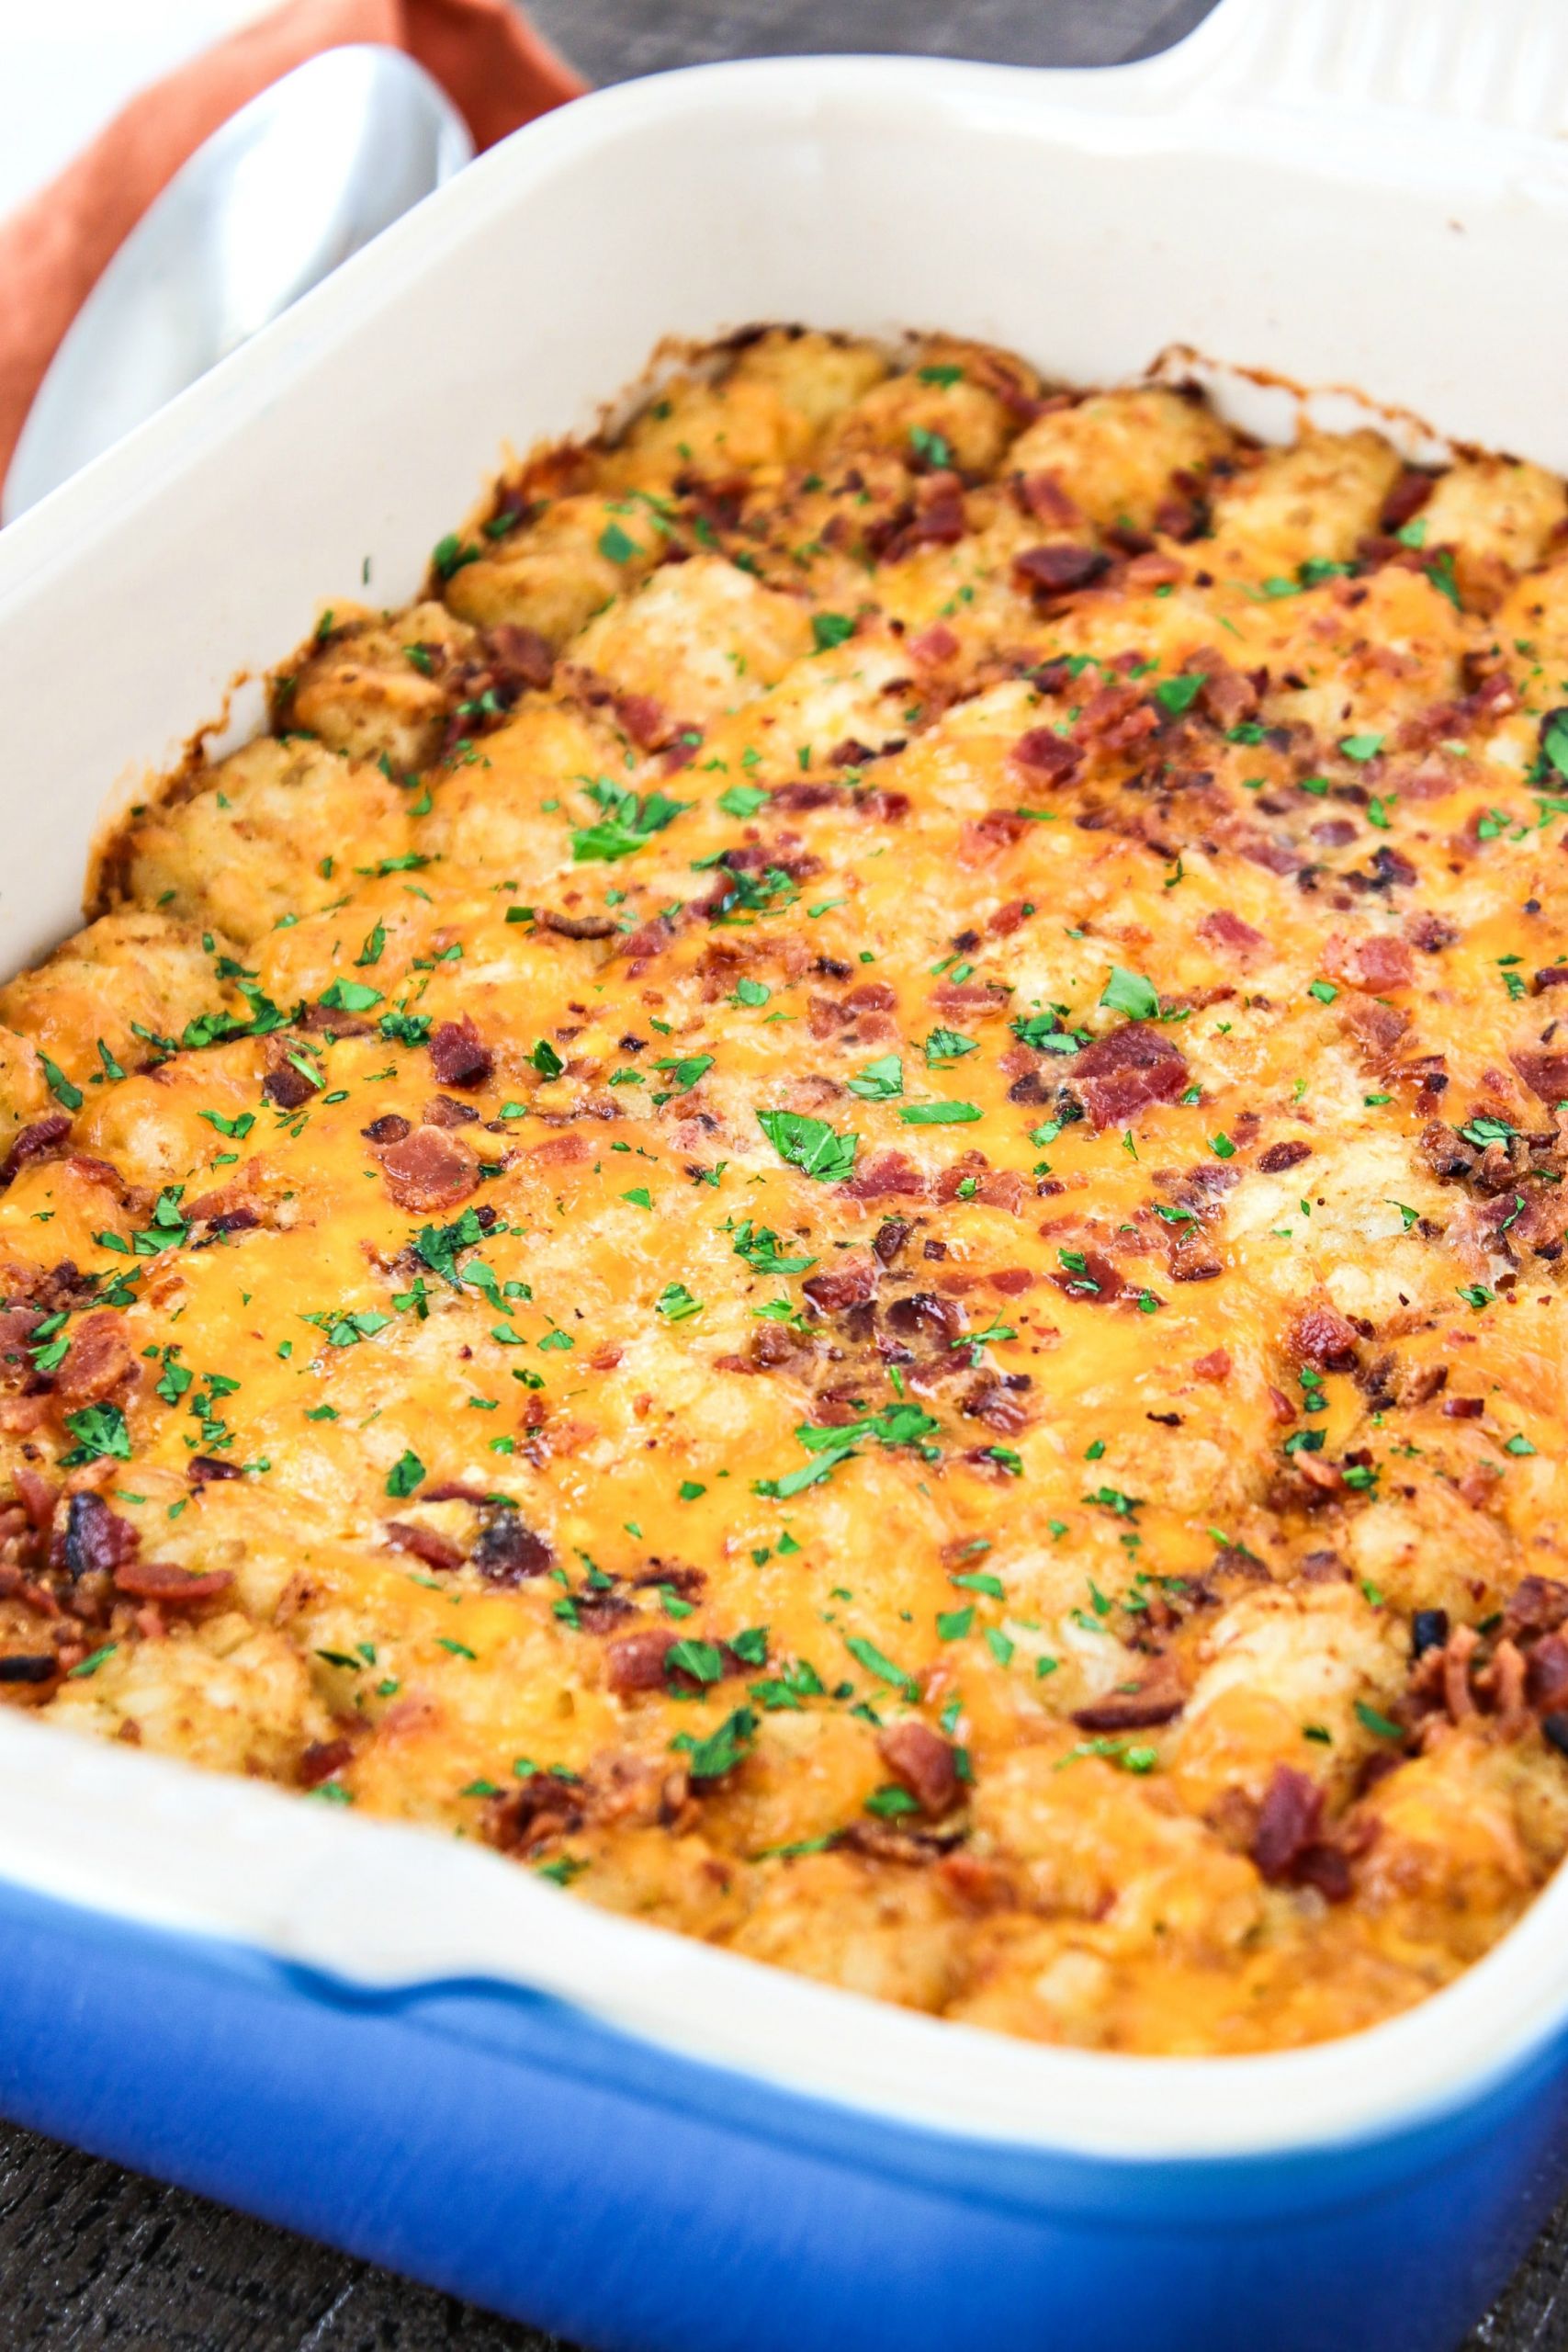 Breakfast Casserole With Tater Tots And Bacon
 Cheesy Tater Tot Breakfast Casserole CPA Certified